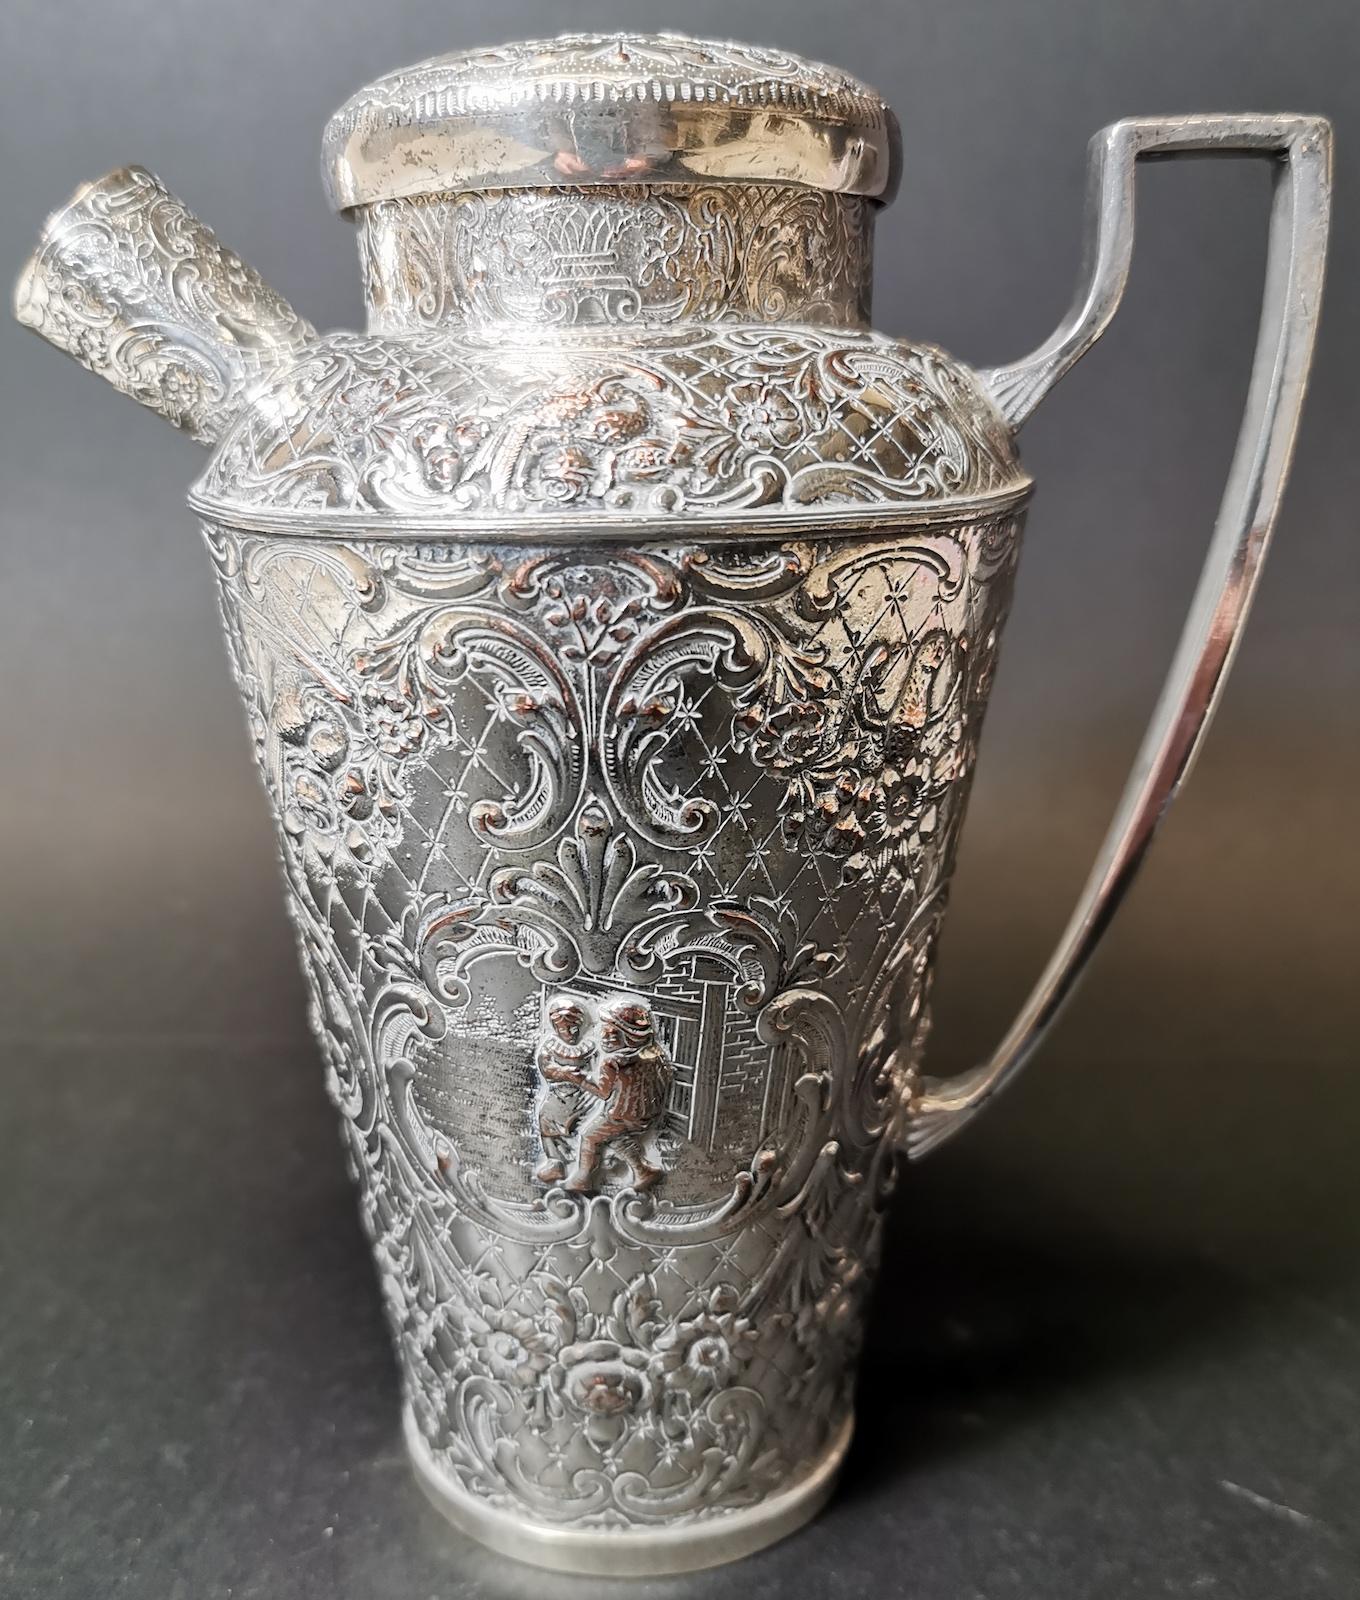 Dutch silver, ewer or jug,
hallmarked CF (1889) embossed design,
563 grams, 19.8 ounces.
Our eclectic stock crosses cultures, continents, styles and famous names.